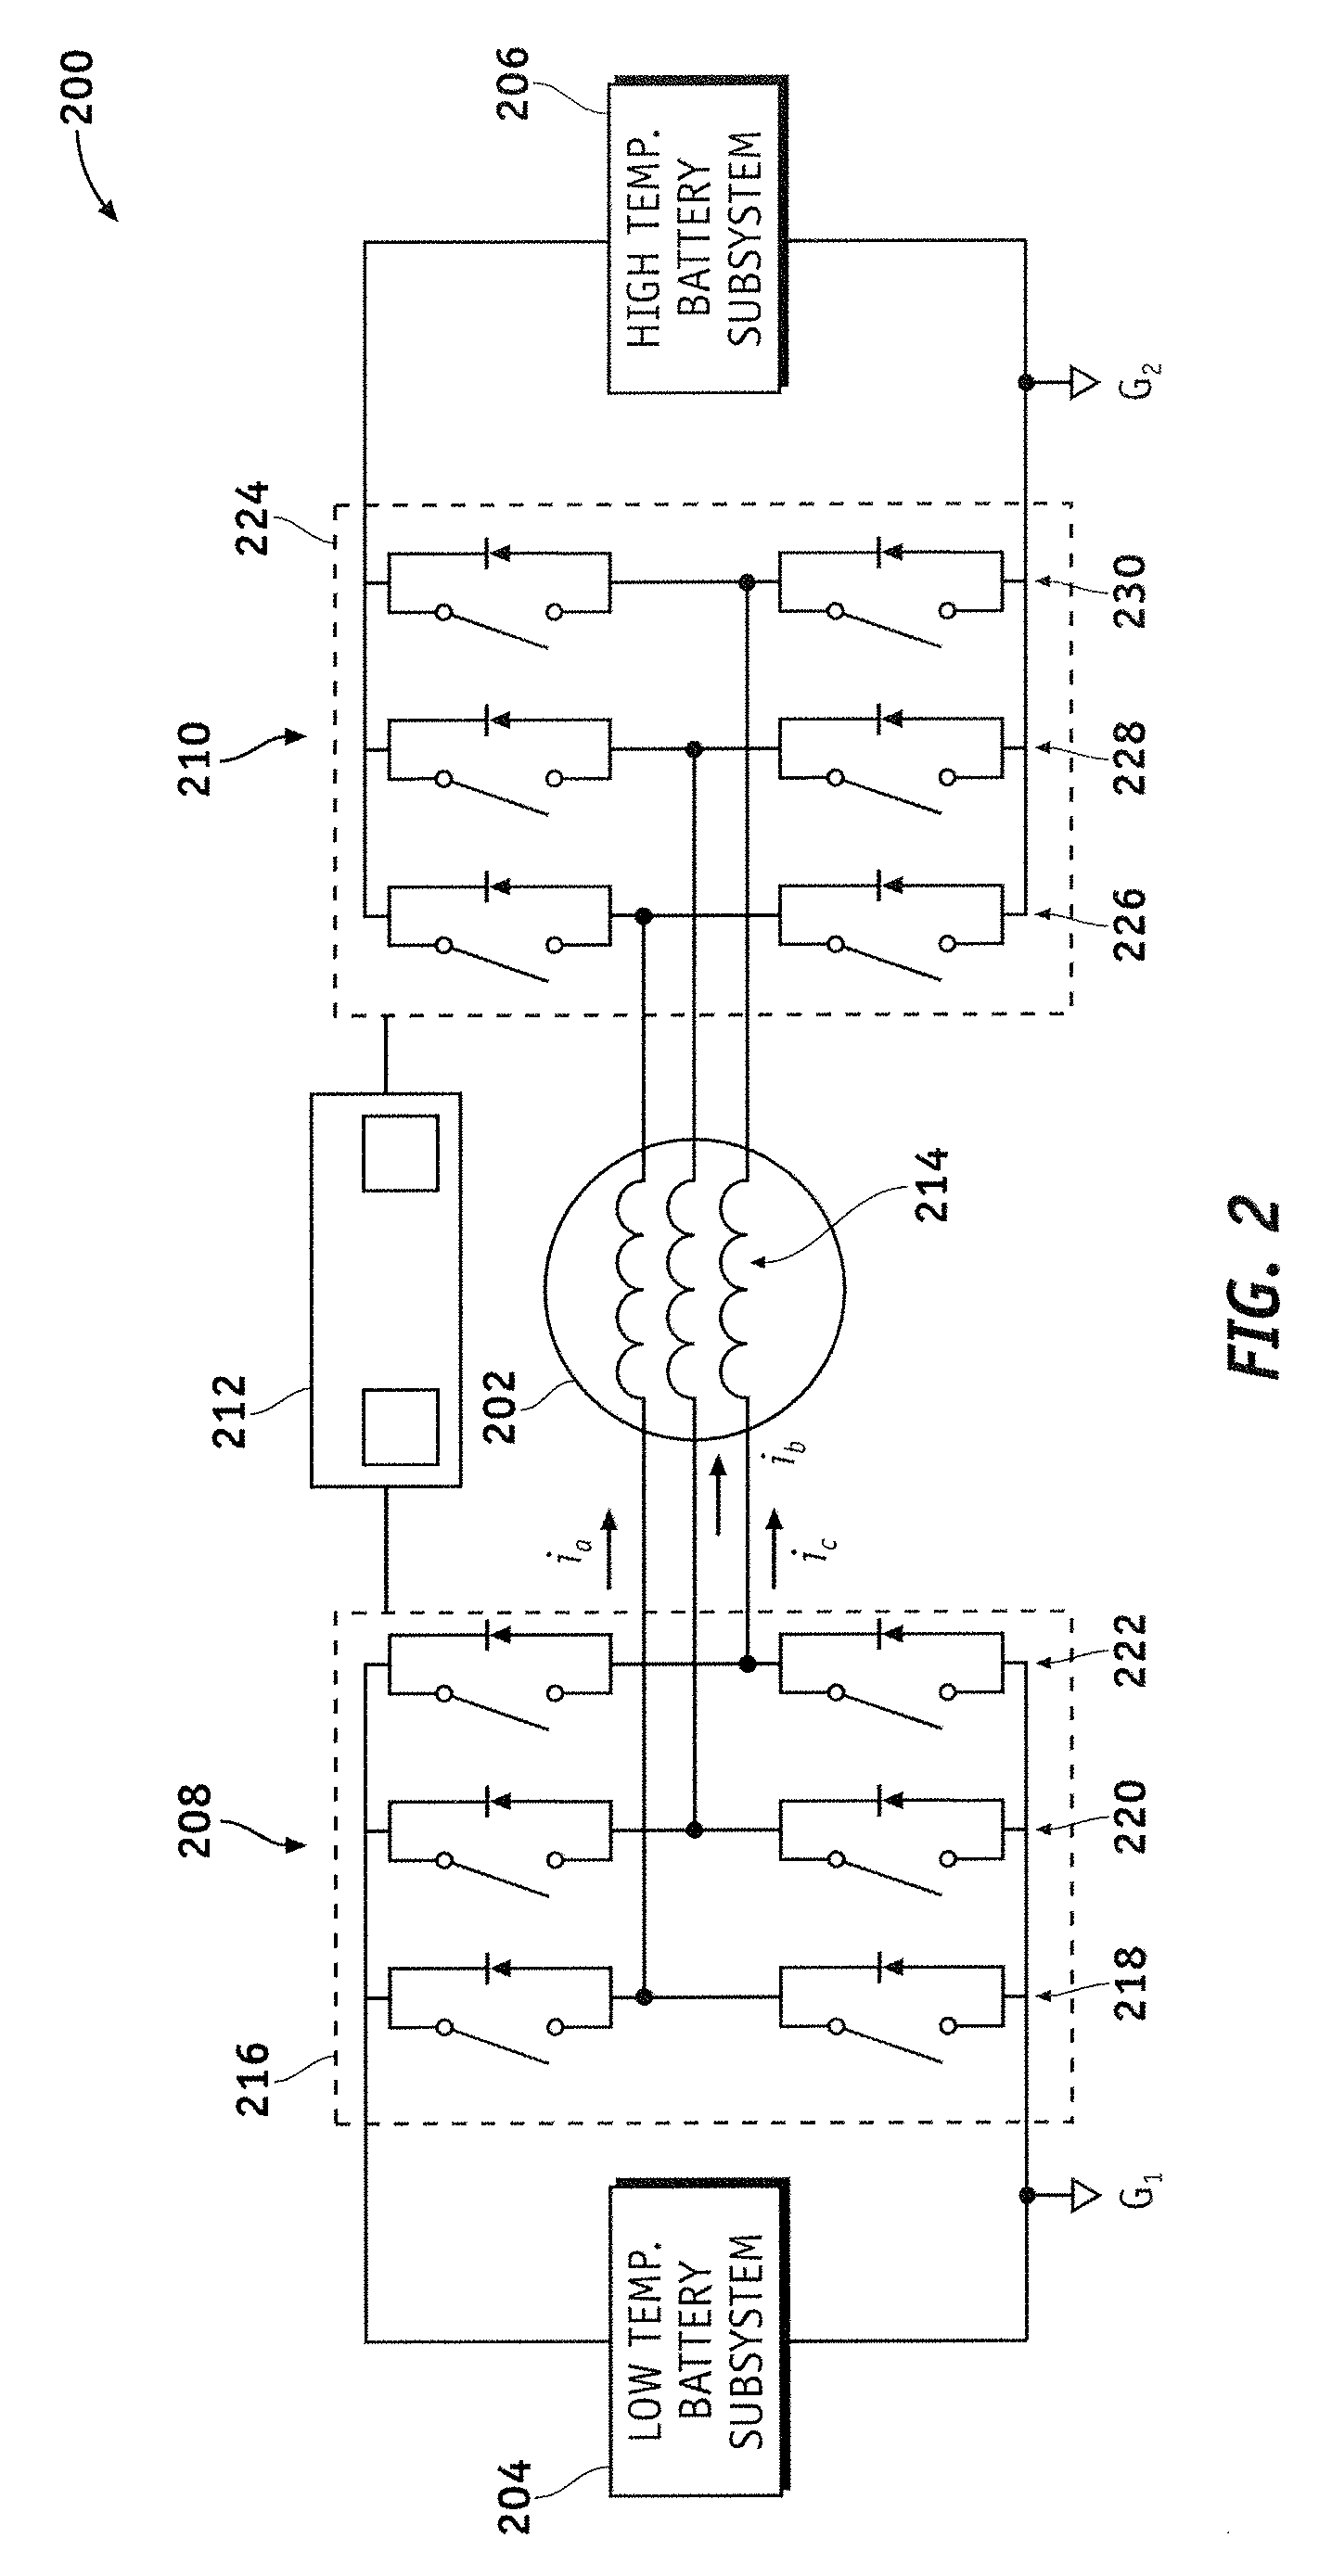 Double ended inverter system for a vehicle having two energy sources that exhibit different operating characteristics